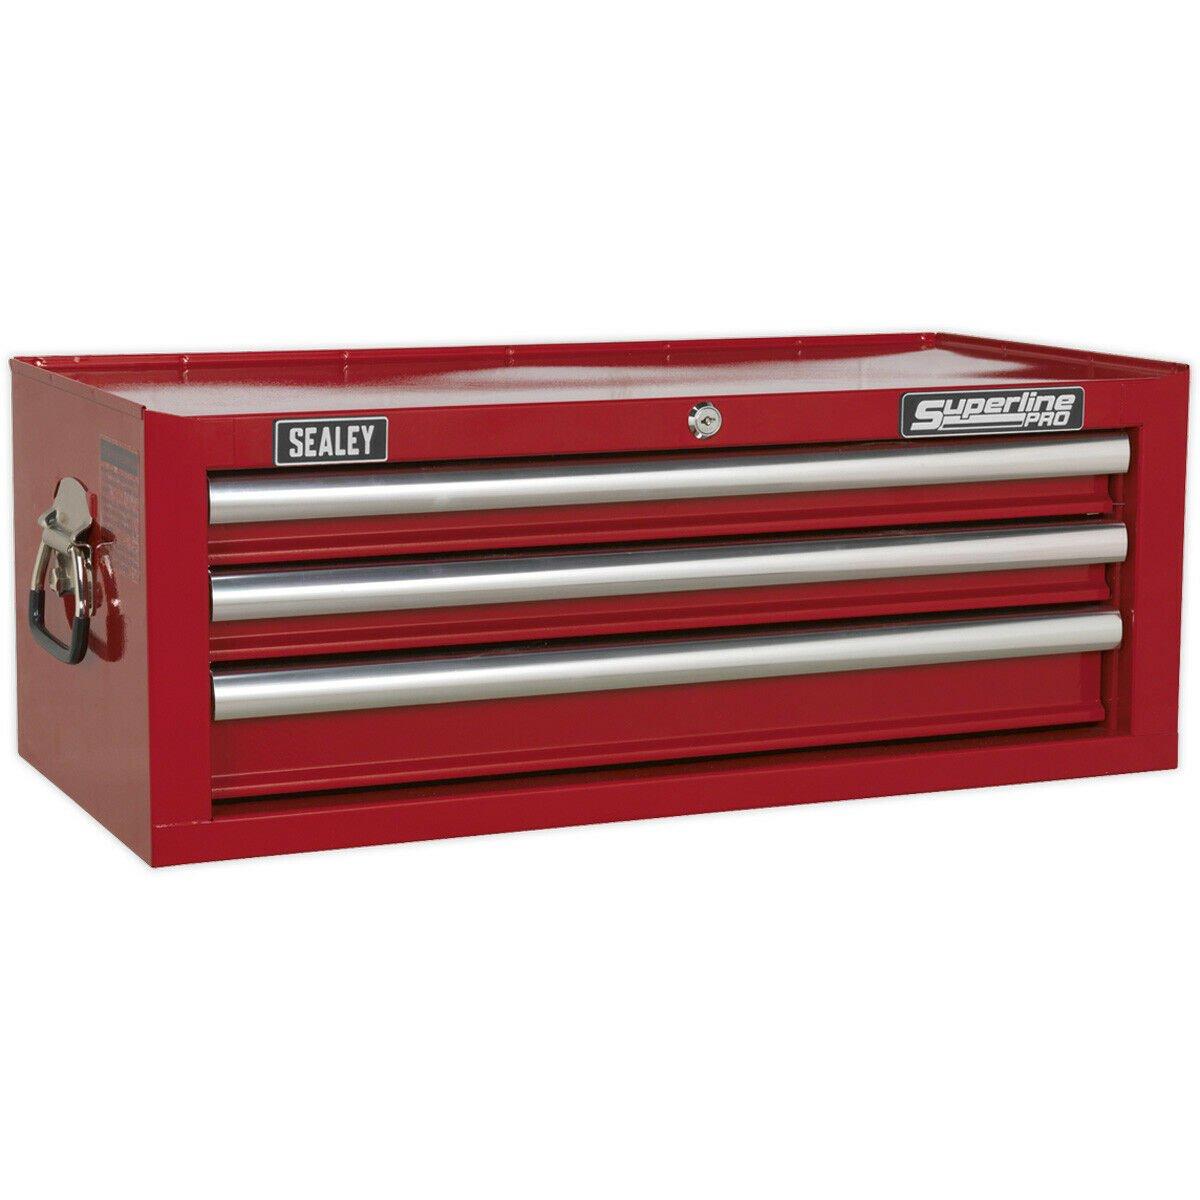 670 x 320 x 255mm RED 3 Drawer MID-BOX Tool Chest Lockable Storage Unit Cabinet